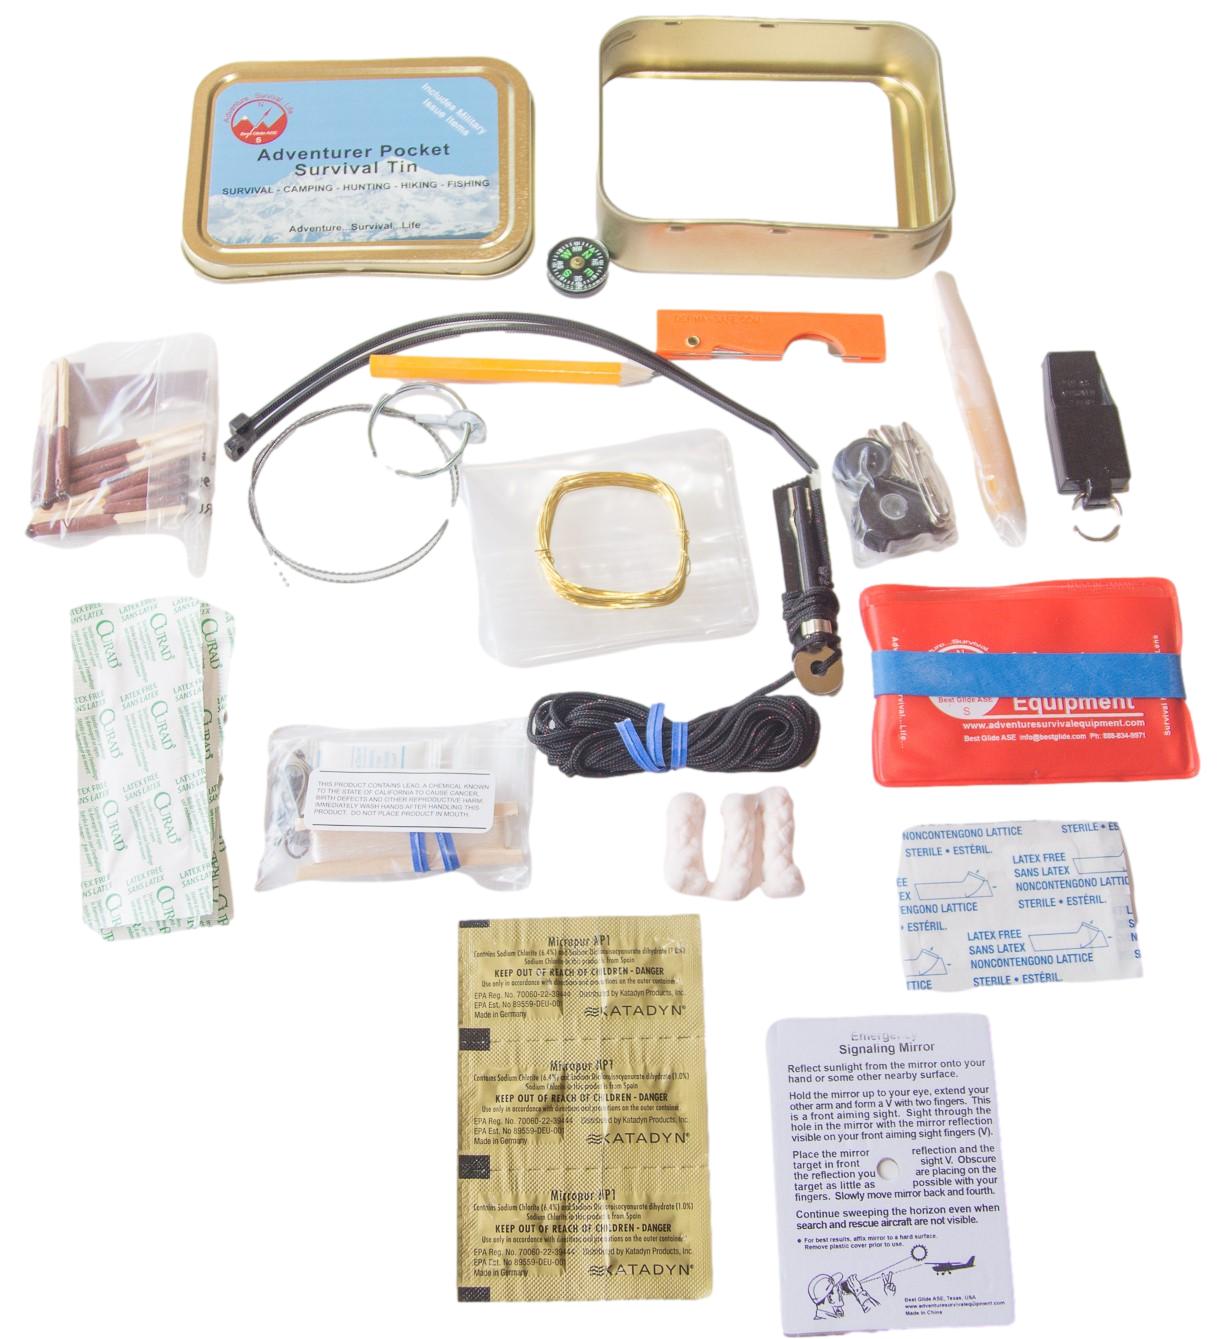 Best Glide ASE Survival Sewing and Repair Kit